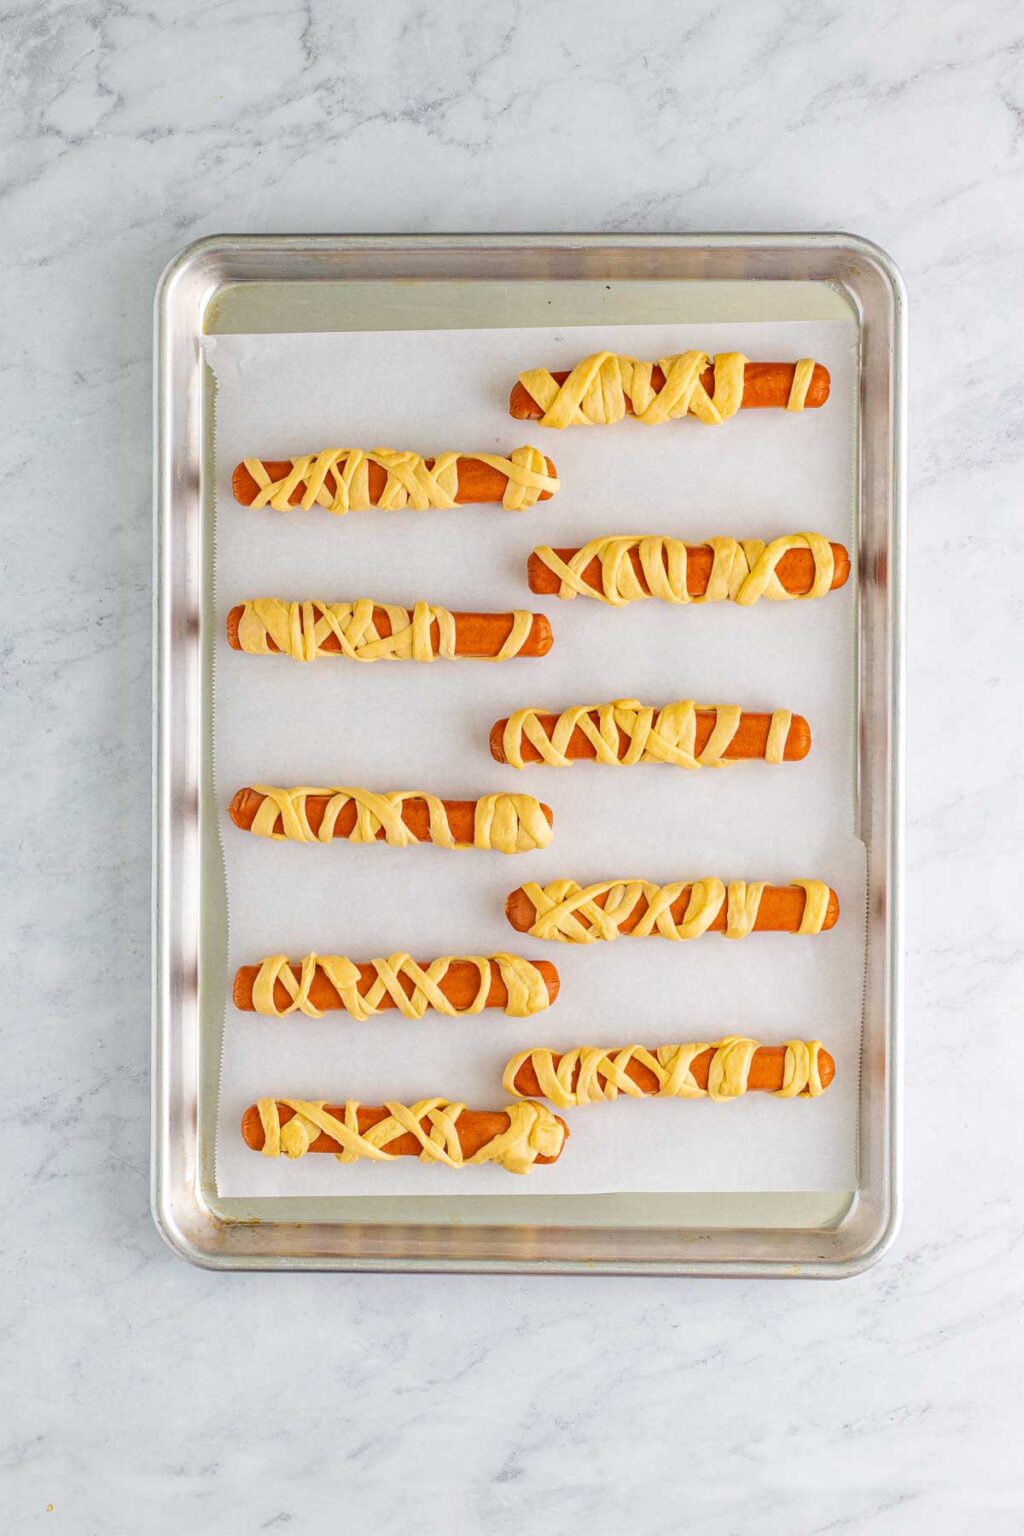 Easy Mummy Dogs Recipe for Halloween - Play Party Plan